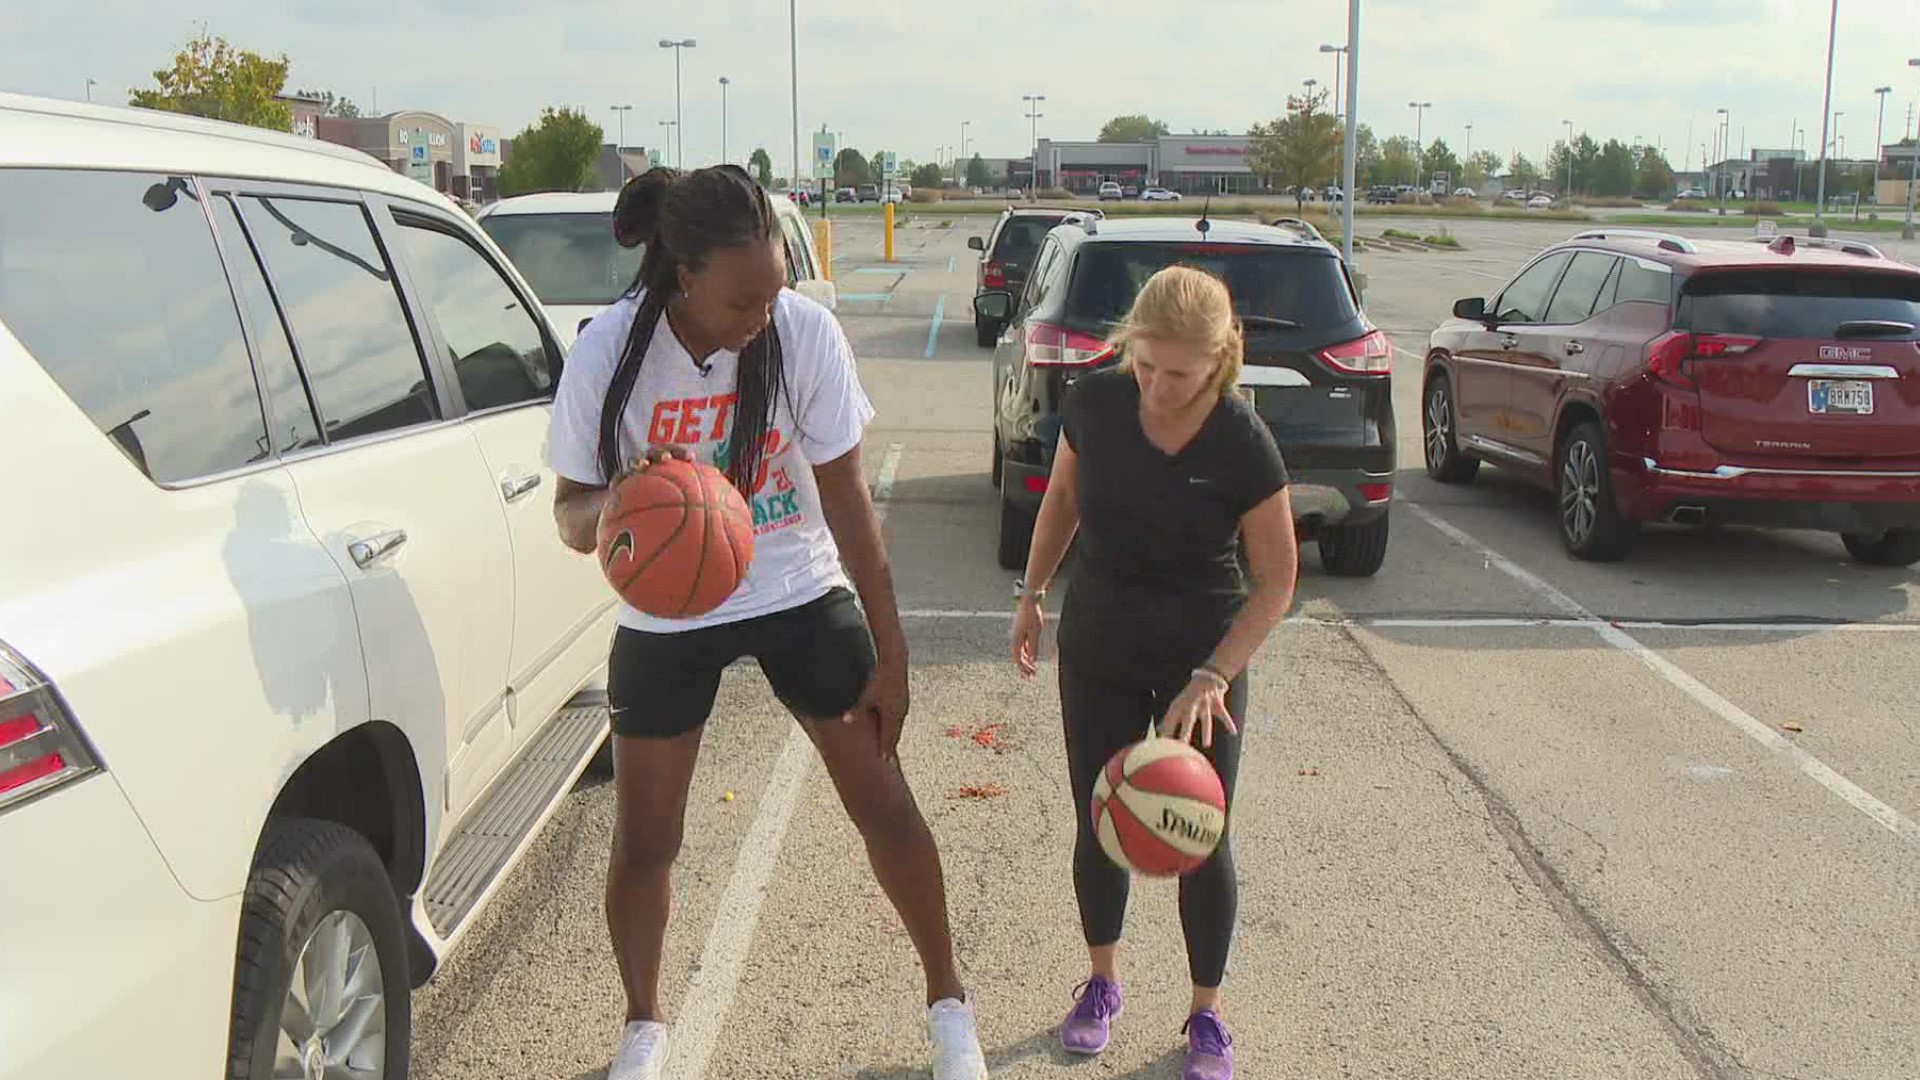 Indiana Fever legend Tamika Catchings joins Anne Marie Tiernon for today's Friday Fit Tip to share some dribbling tips.